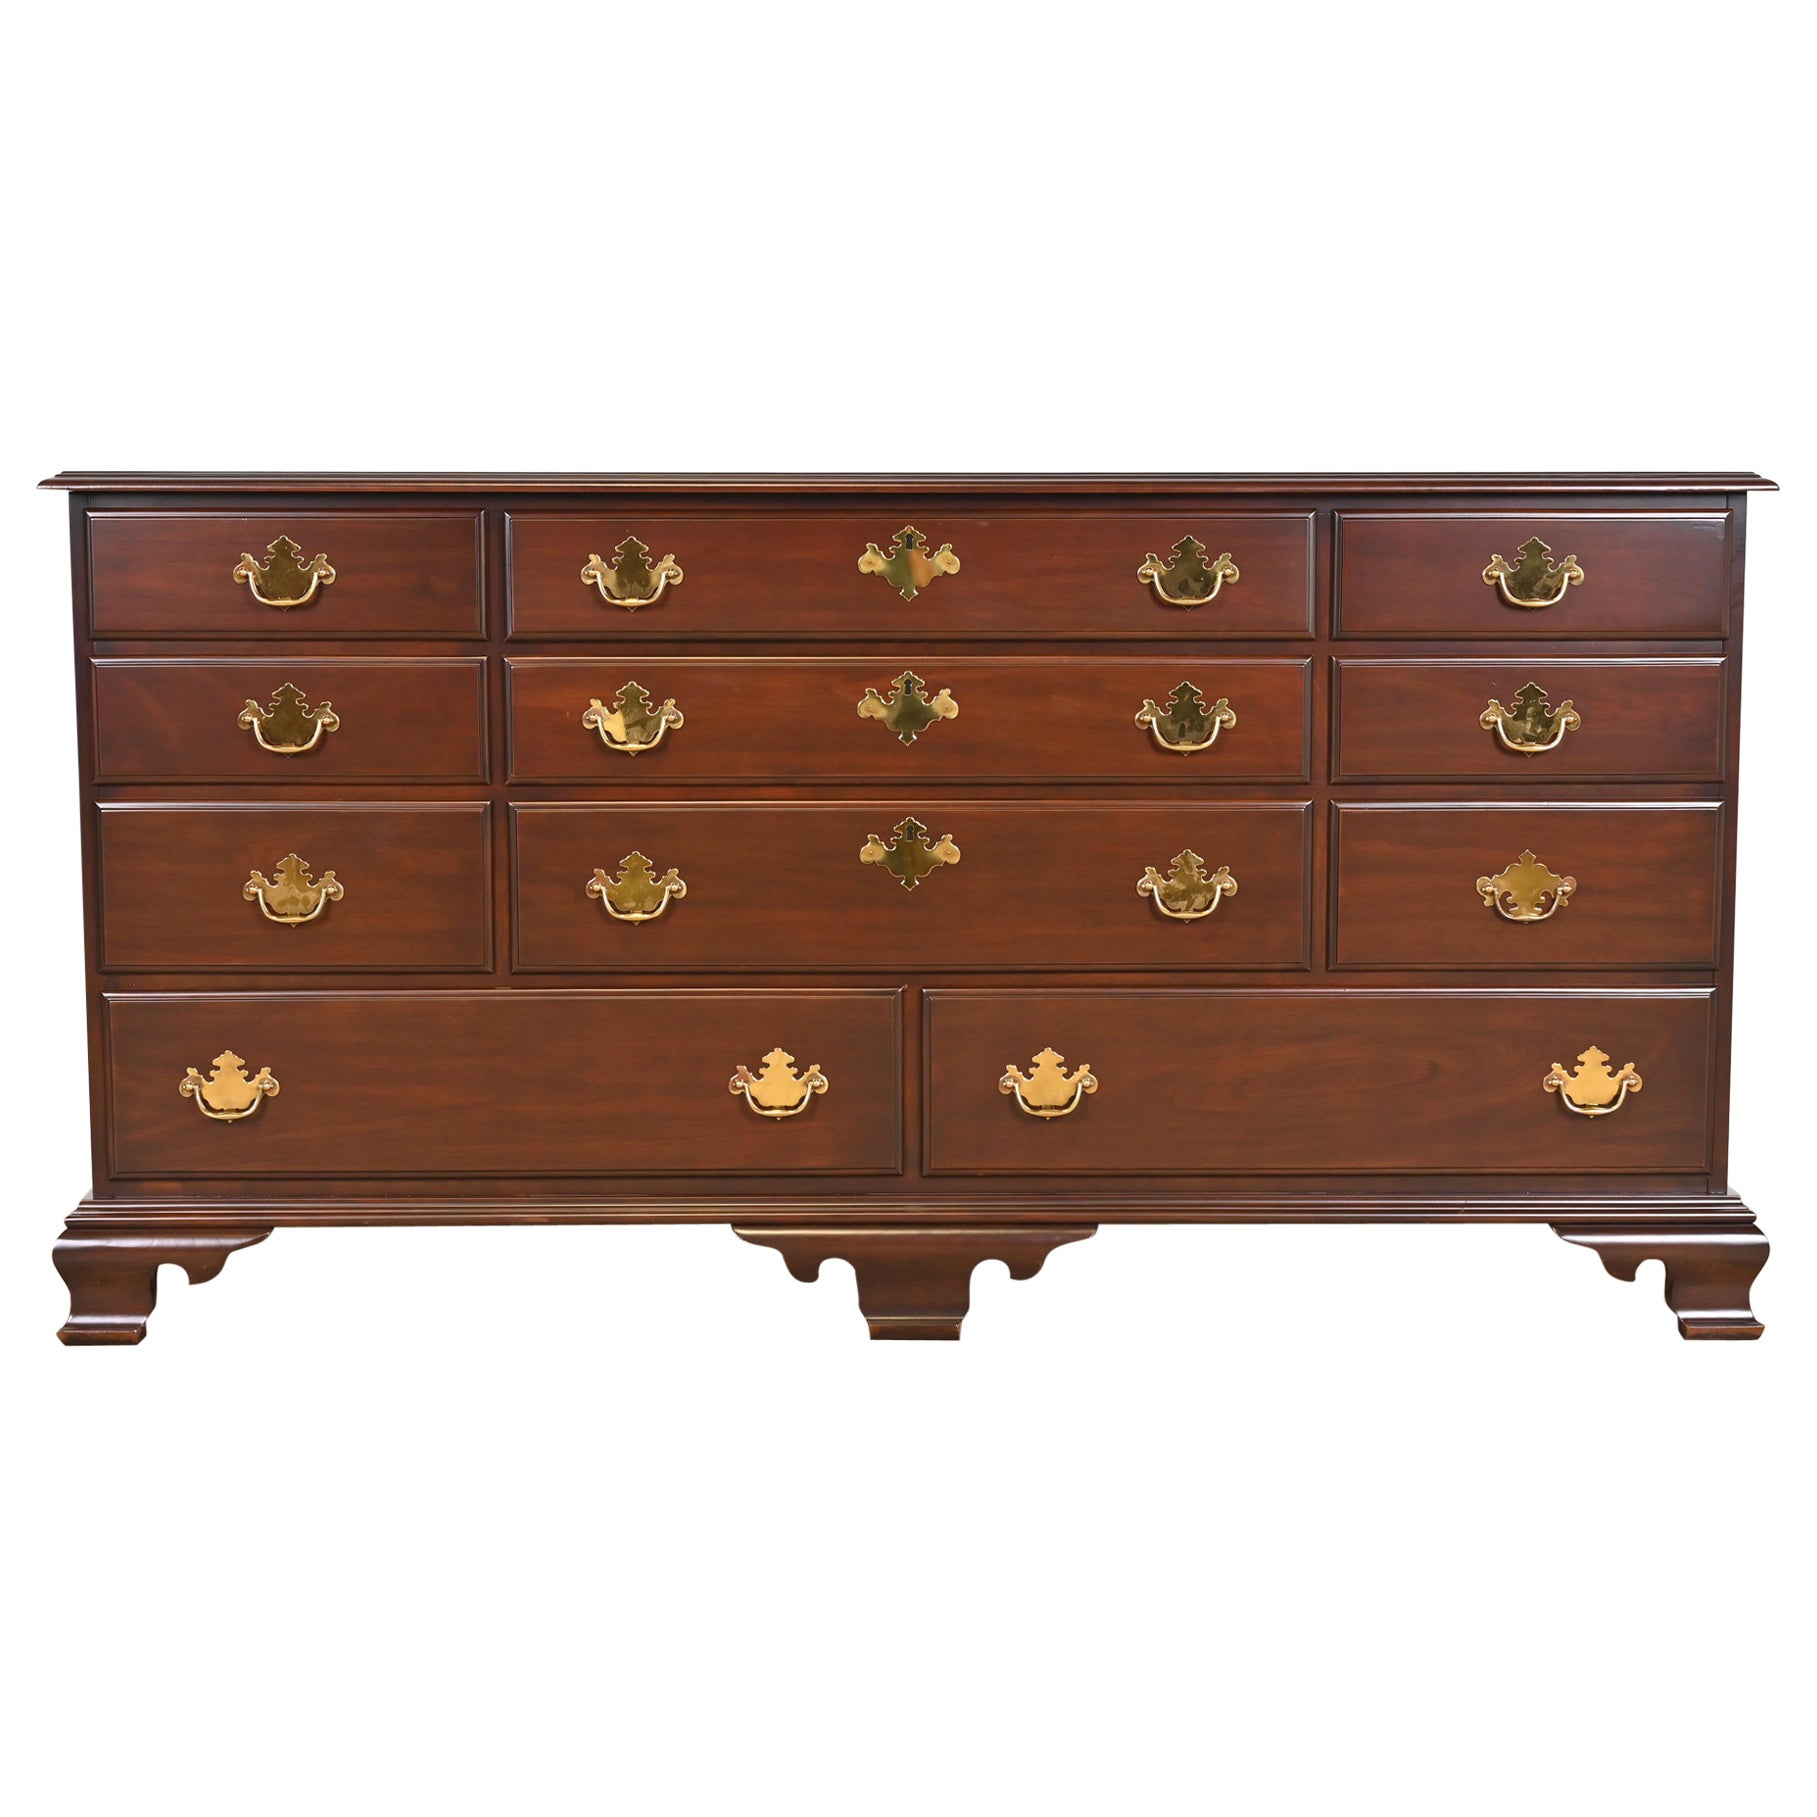 Harden Furniture Georgian Carved Solid Cherry Wood Long Dresser, Newly Restored For Sale